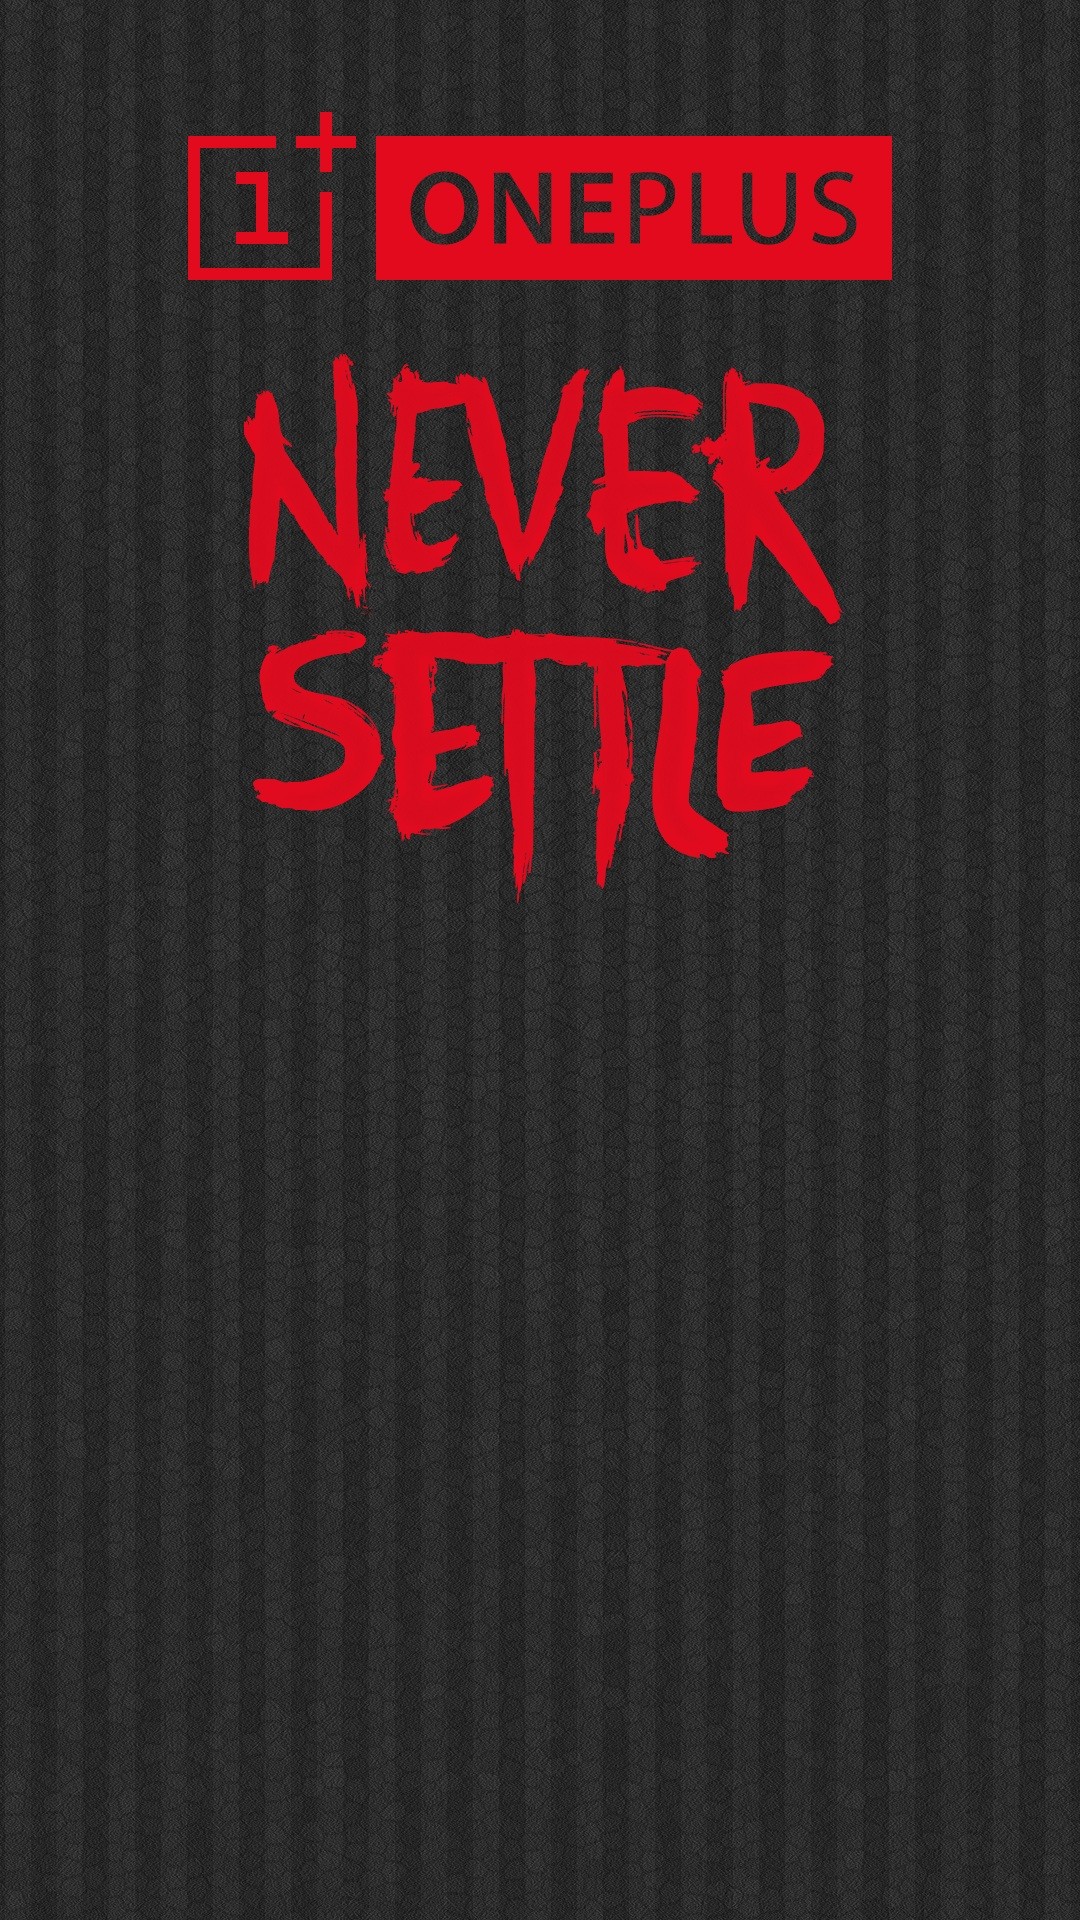 Download Oneplus One Lock Wall Black Red 1080 X 1920 - Oneplus Never Settle  Wallpaper Hd - 1080x1920 Wallpaper 